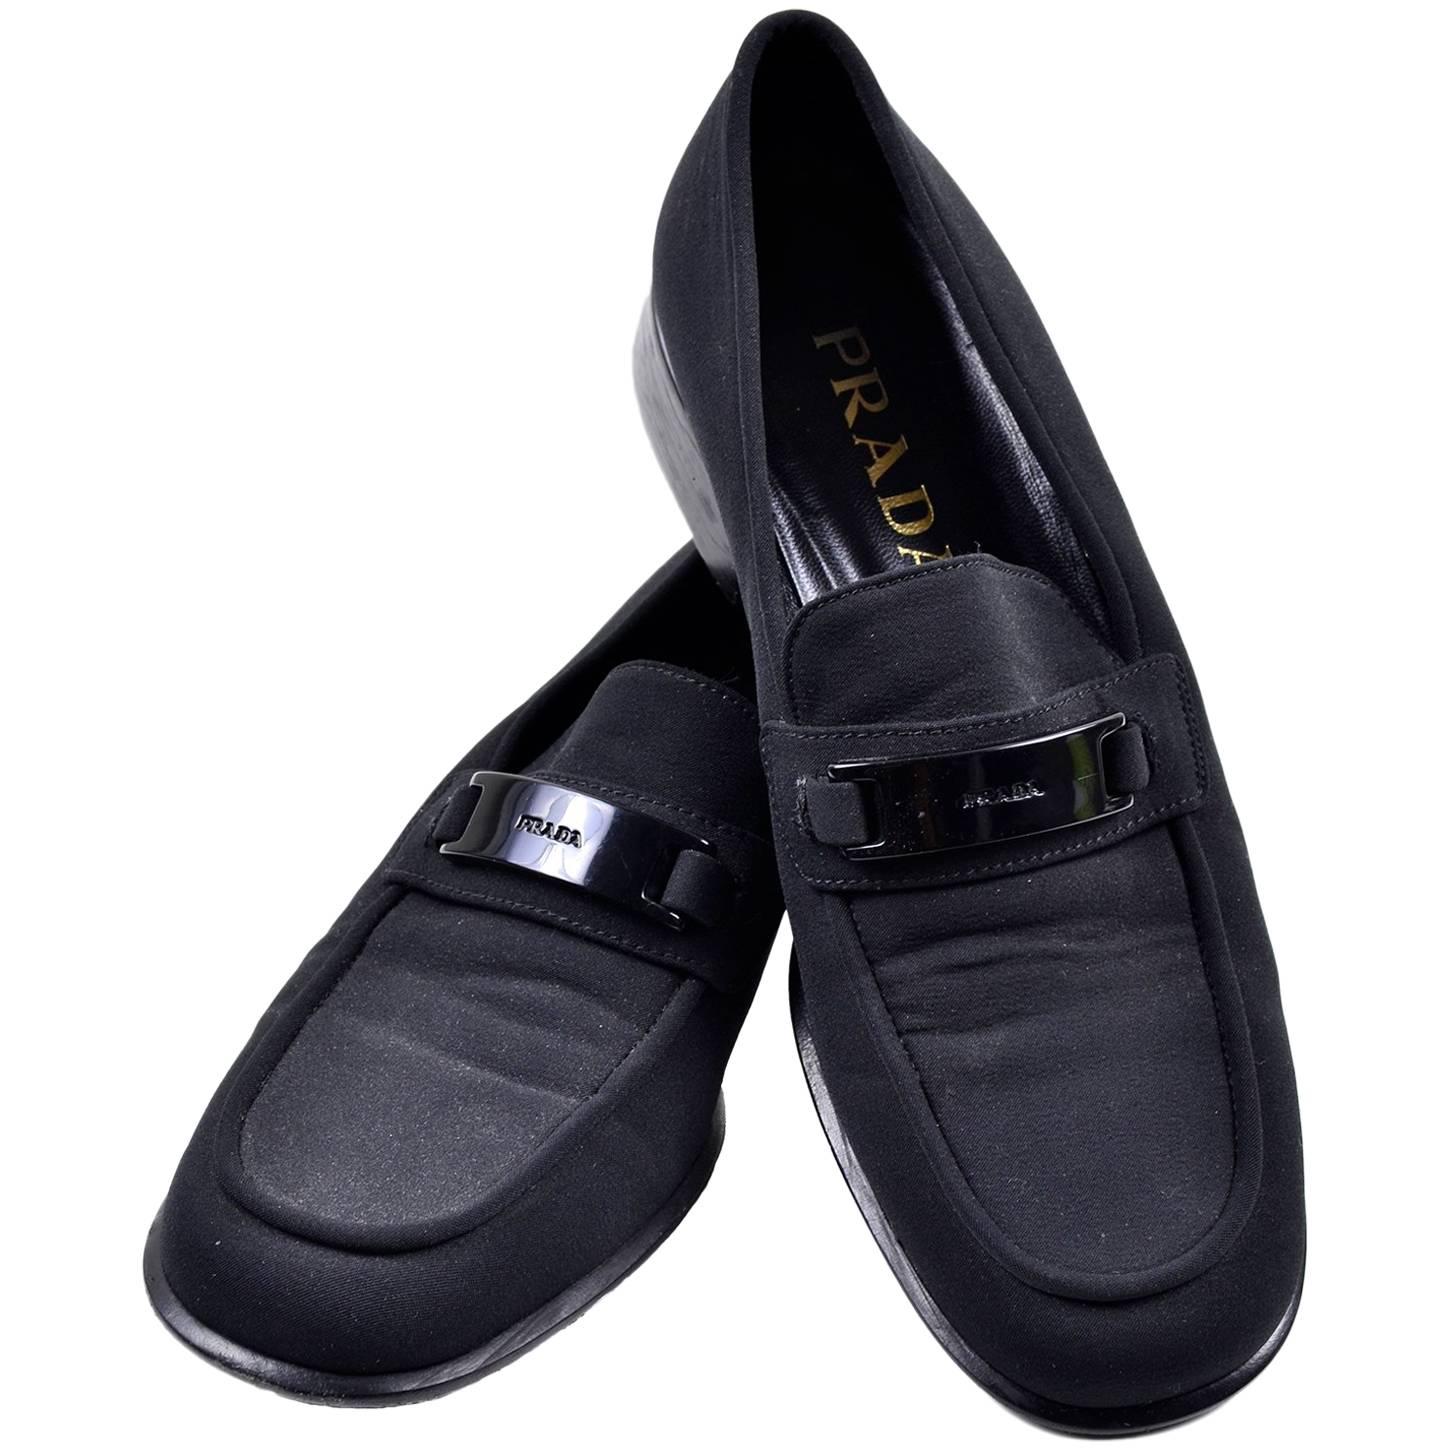 Prada Vintage 1990s Shoes Black Fabric Loafers Size 38